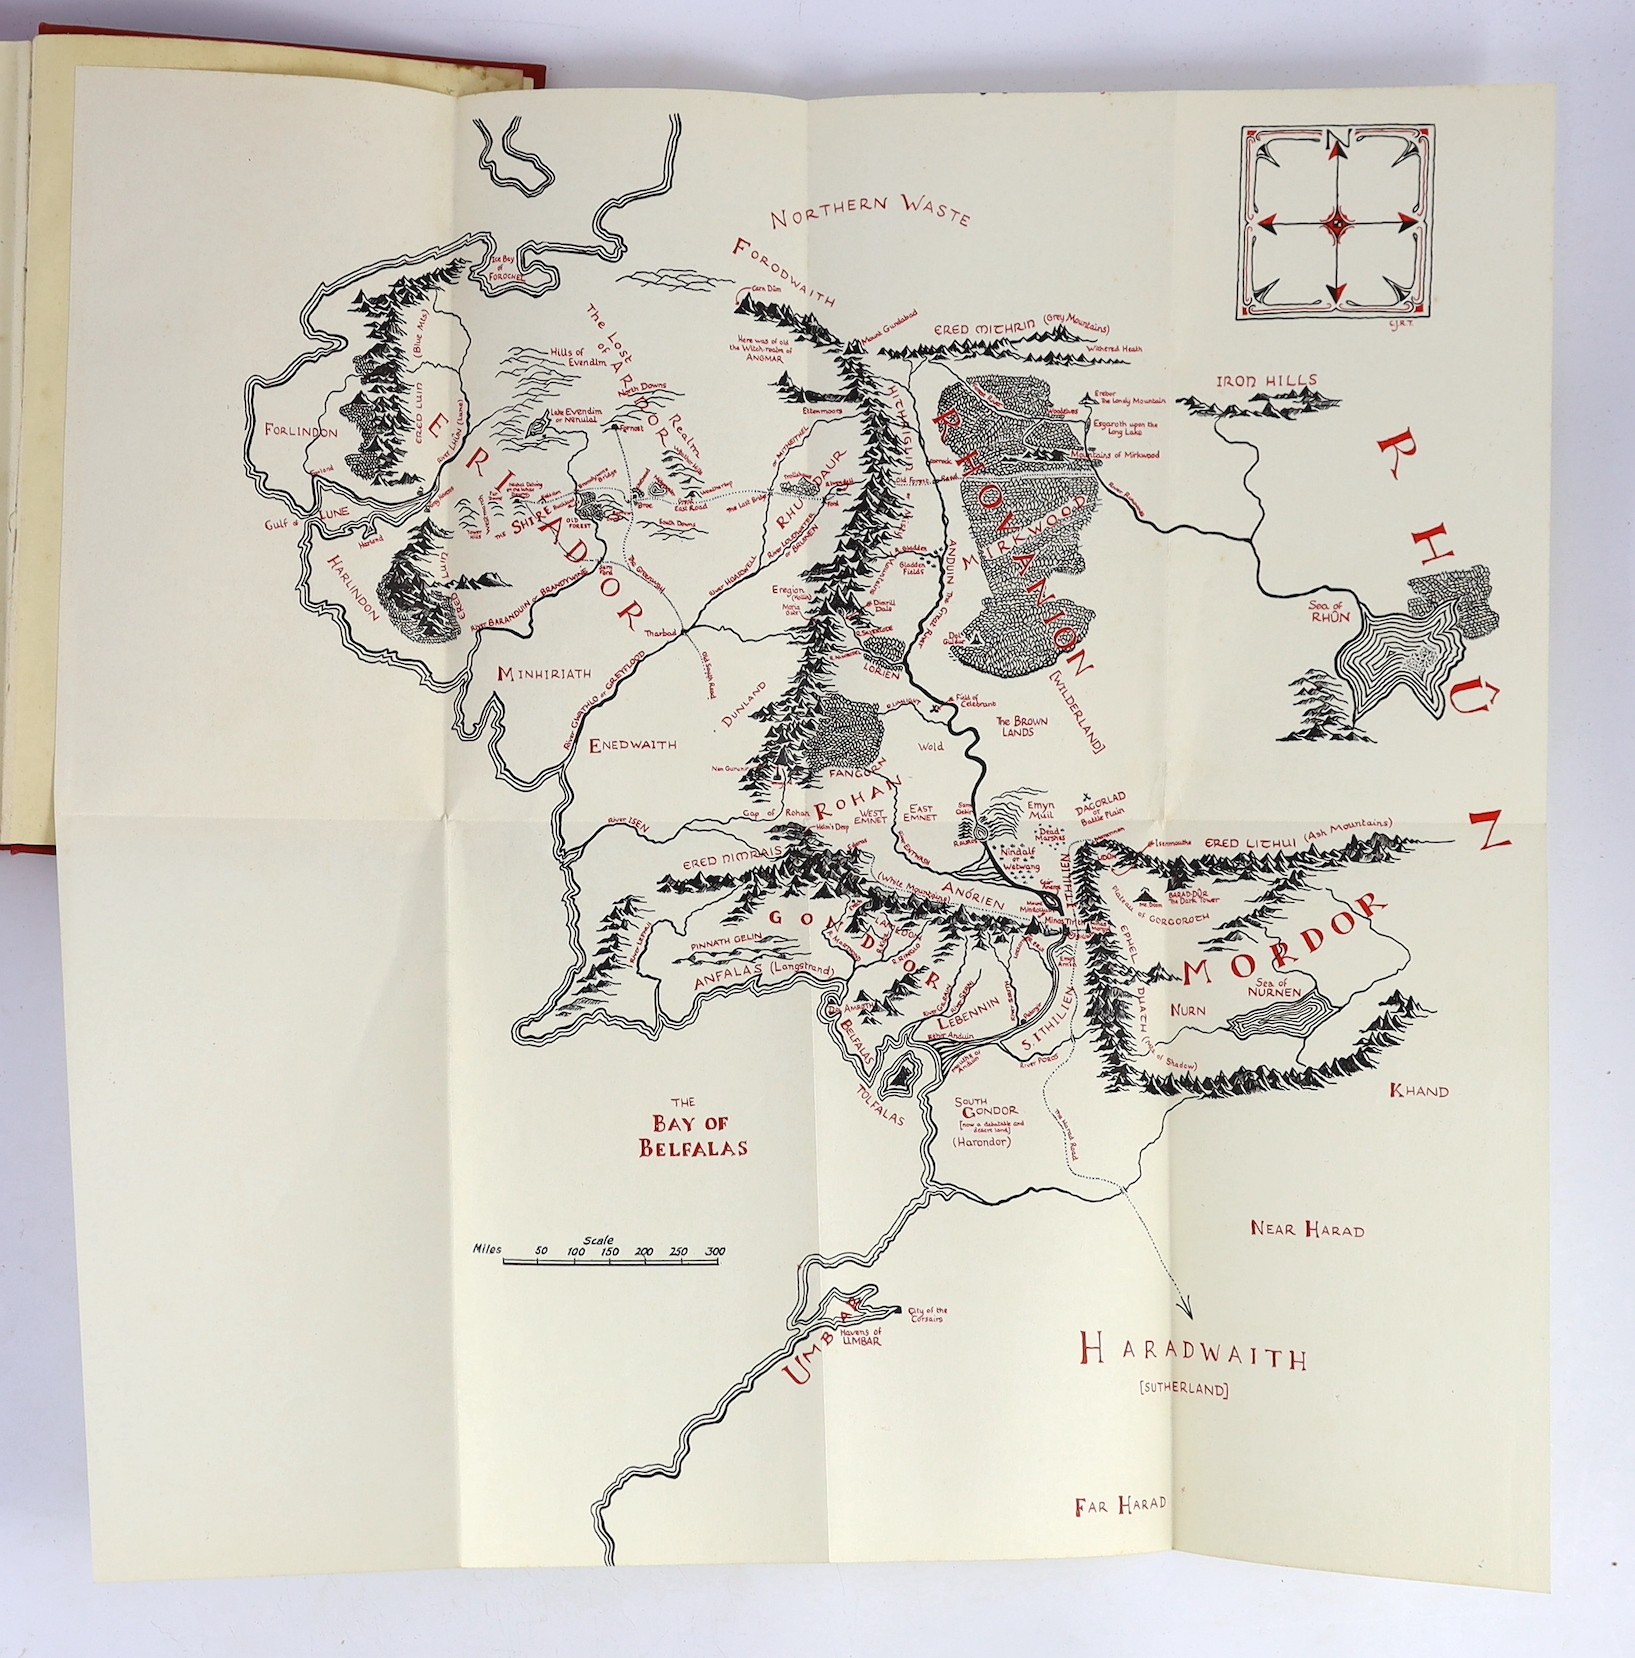 ° ° Tolkien, John Ronald Reuel - The Lord of the Rings, 1st editions, 1st impressions of Towers - Image 13 of 19